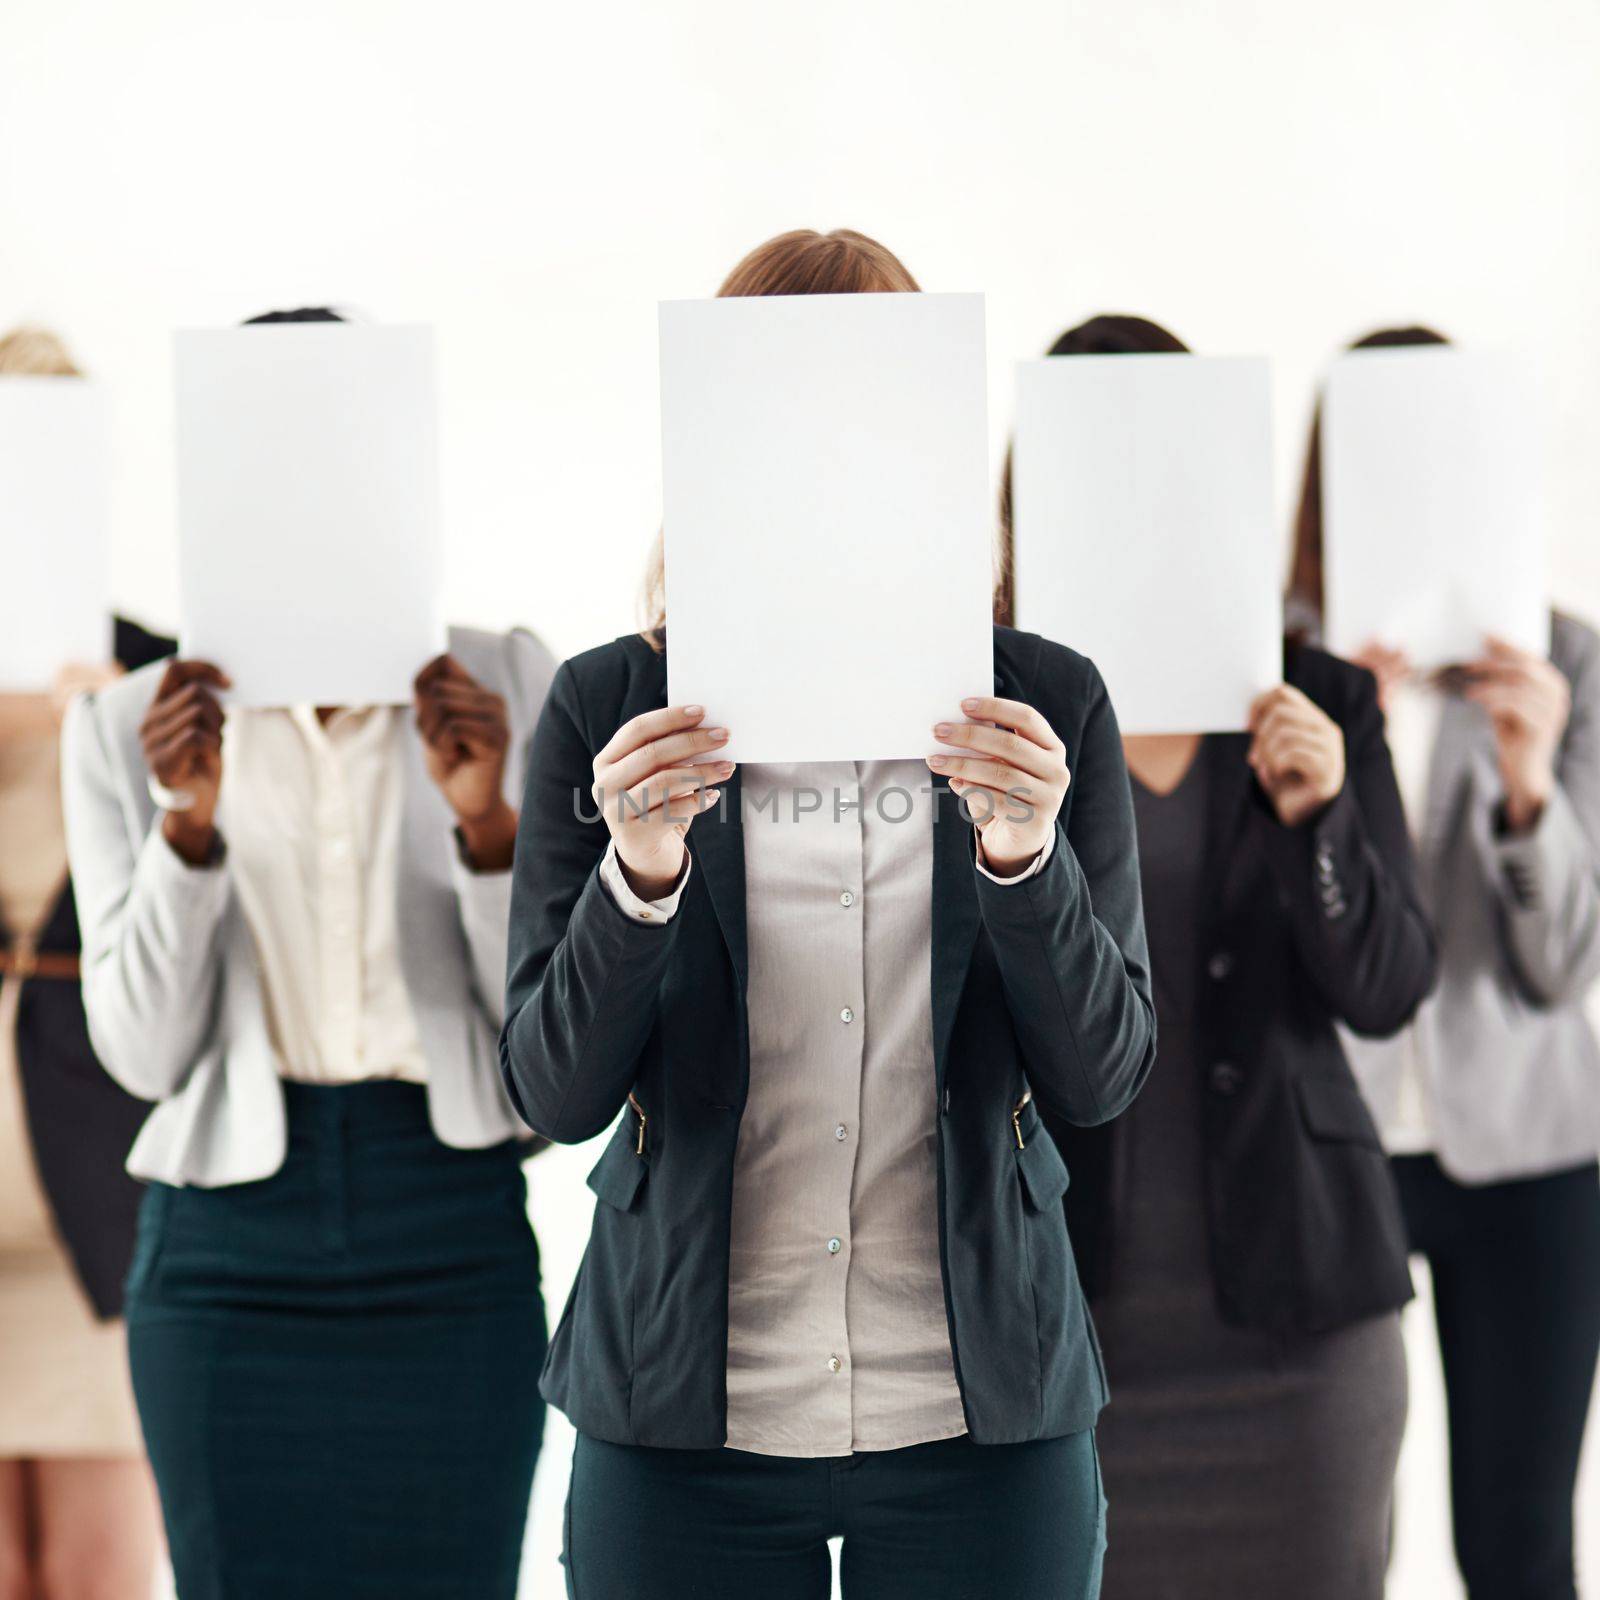 The women behind the business. a group of unrecognizable businesspeople holding blank pieces of paper over their faces against a white background